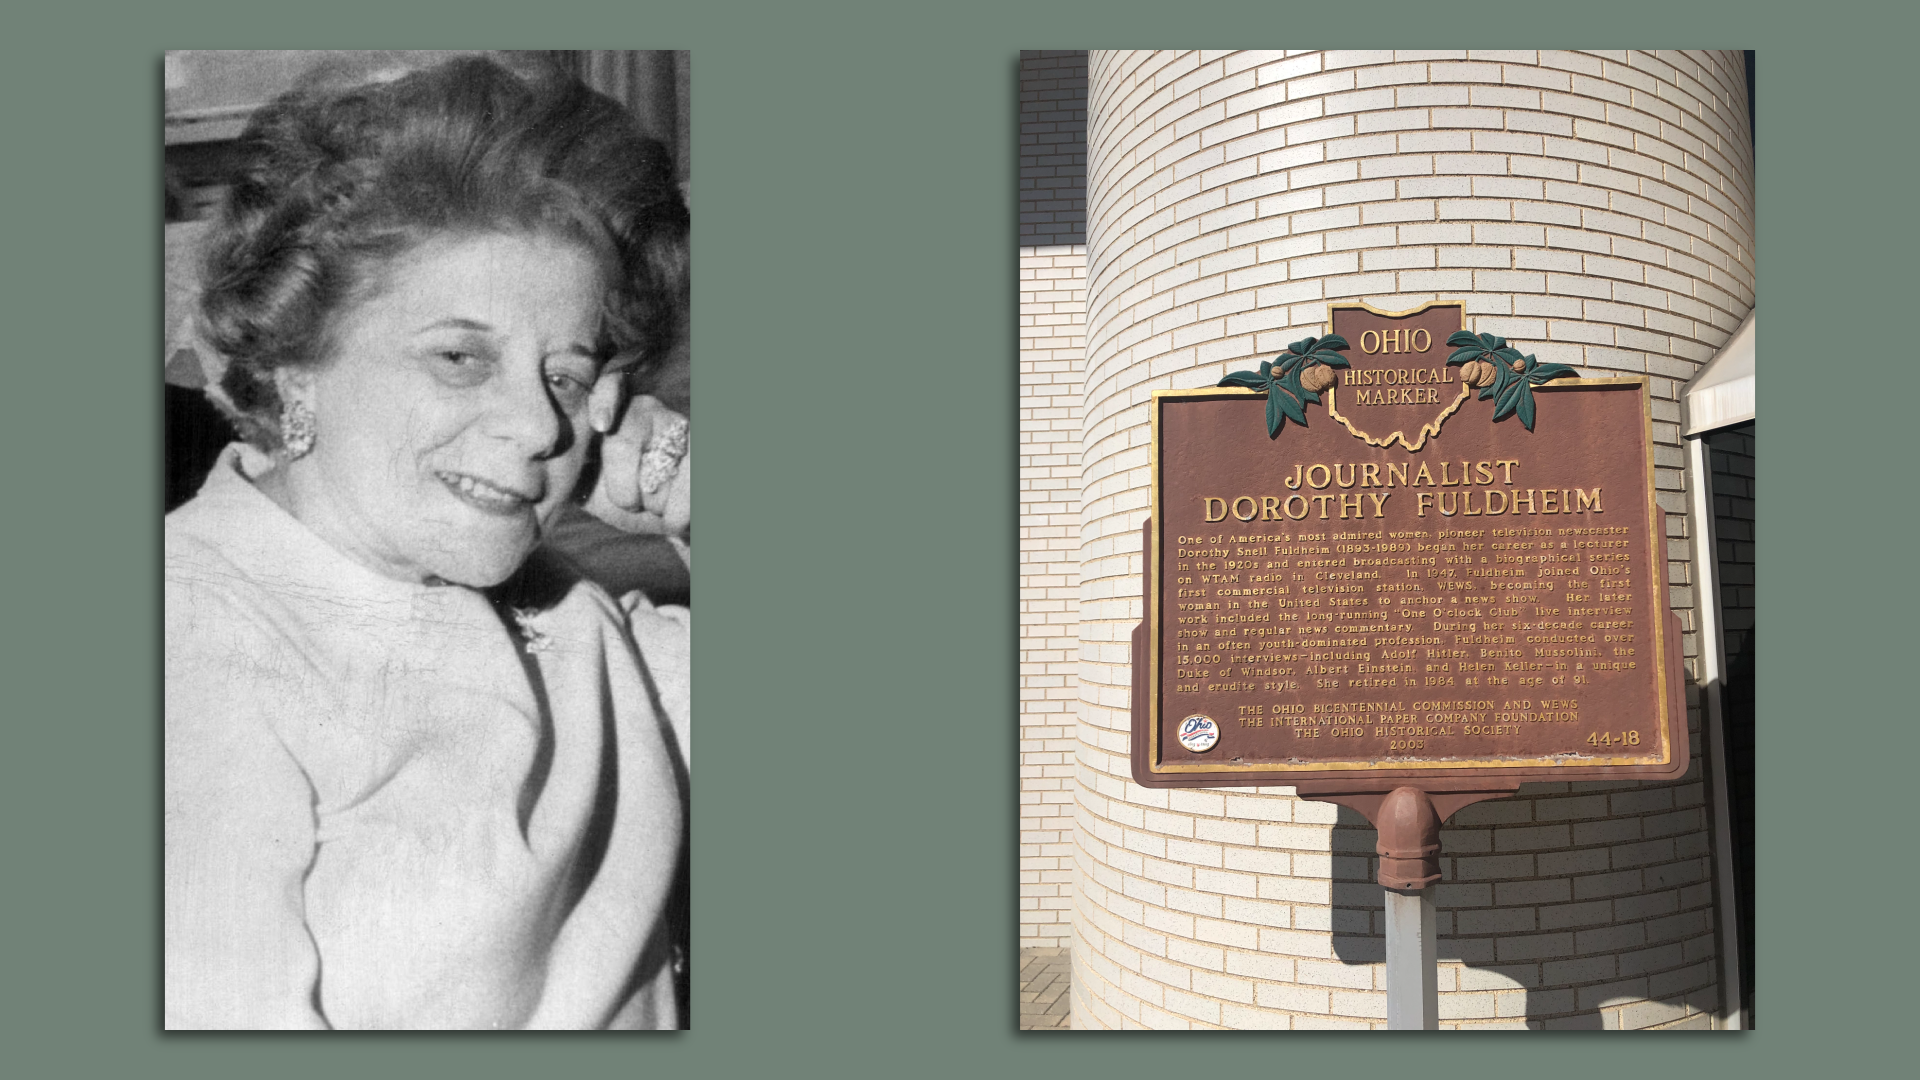 A side by side image of Dorothy Fuldheim (black and white) and Ohio historical marker honoring her